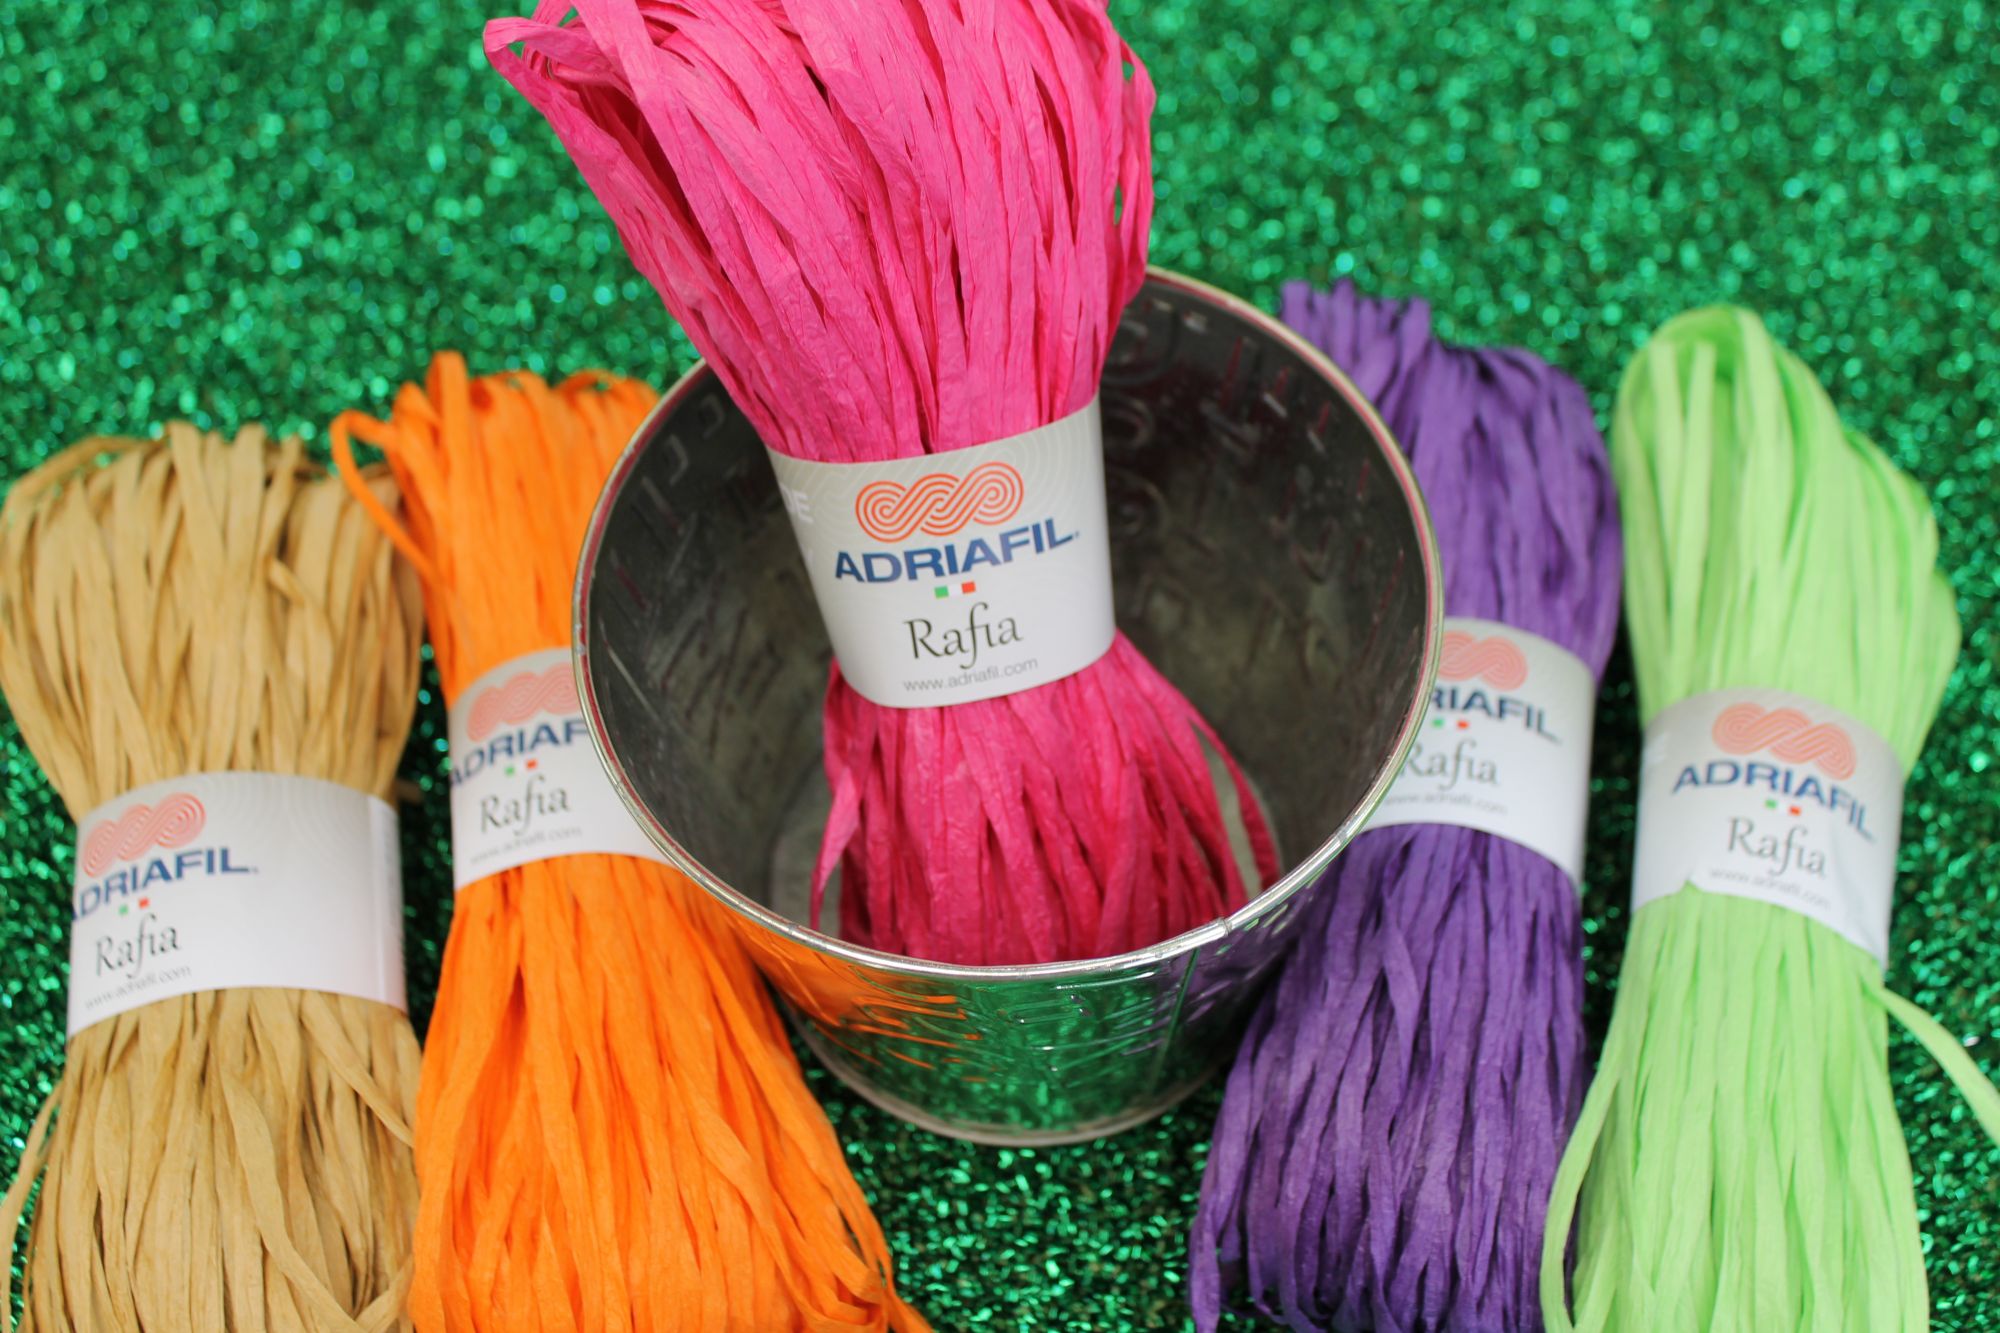 Neon Embroidery Floss By Loops & Threads®